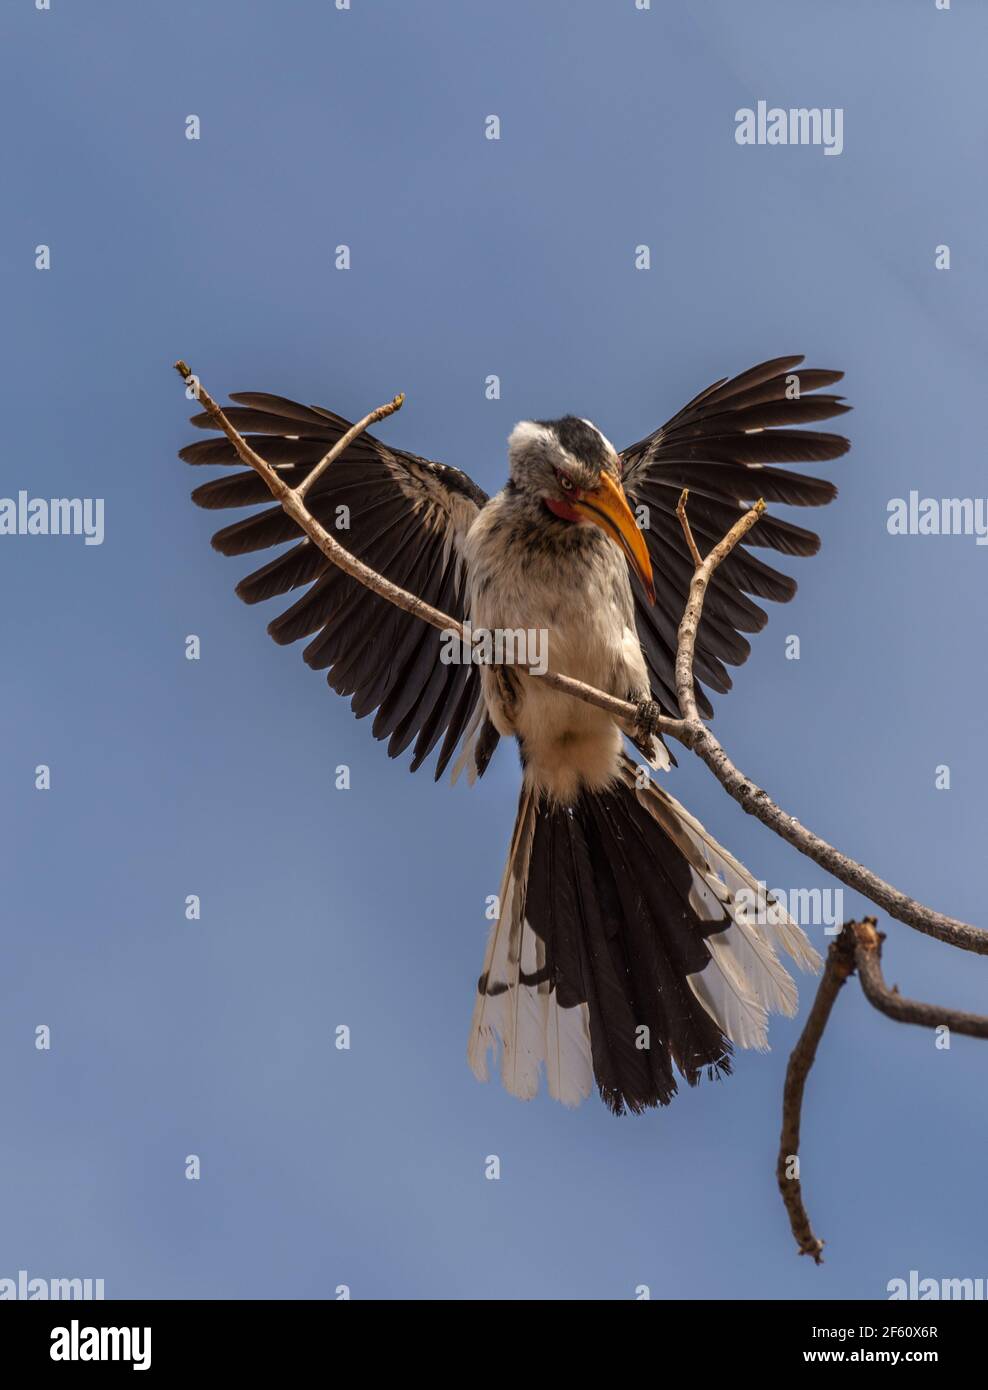 southern yellow-billed hornbill, Tockus leucomelas, on a branch, Namibia Stock Photo